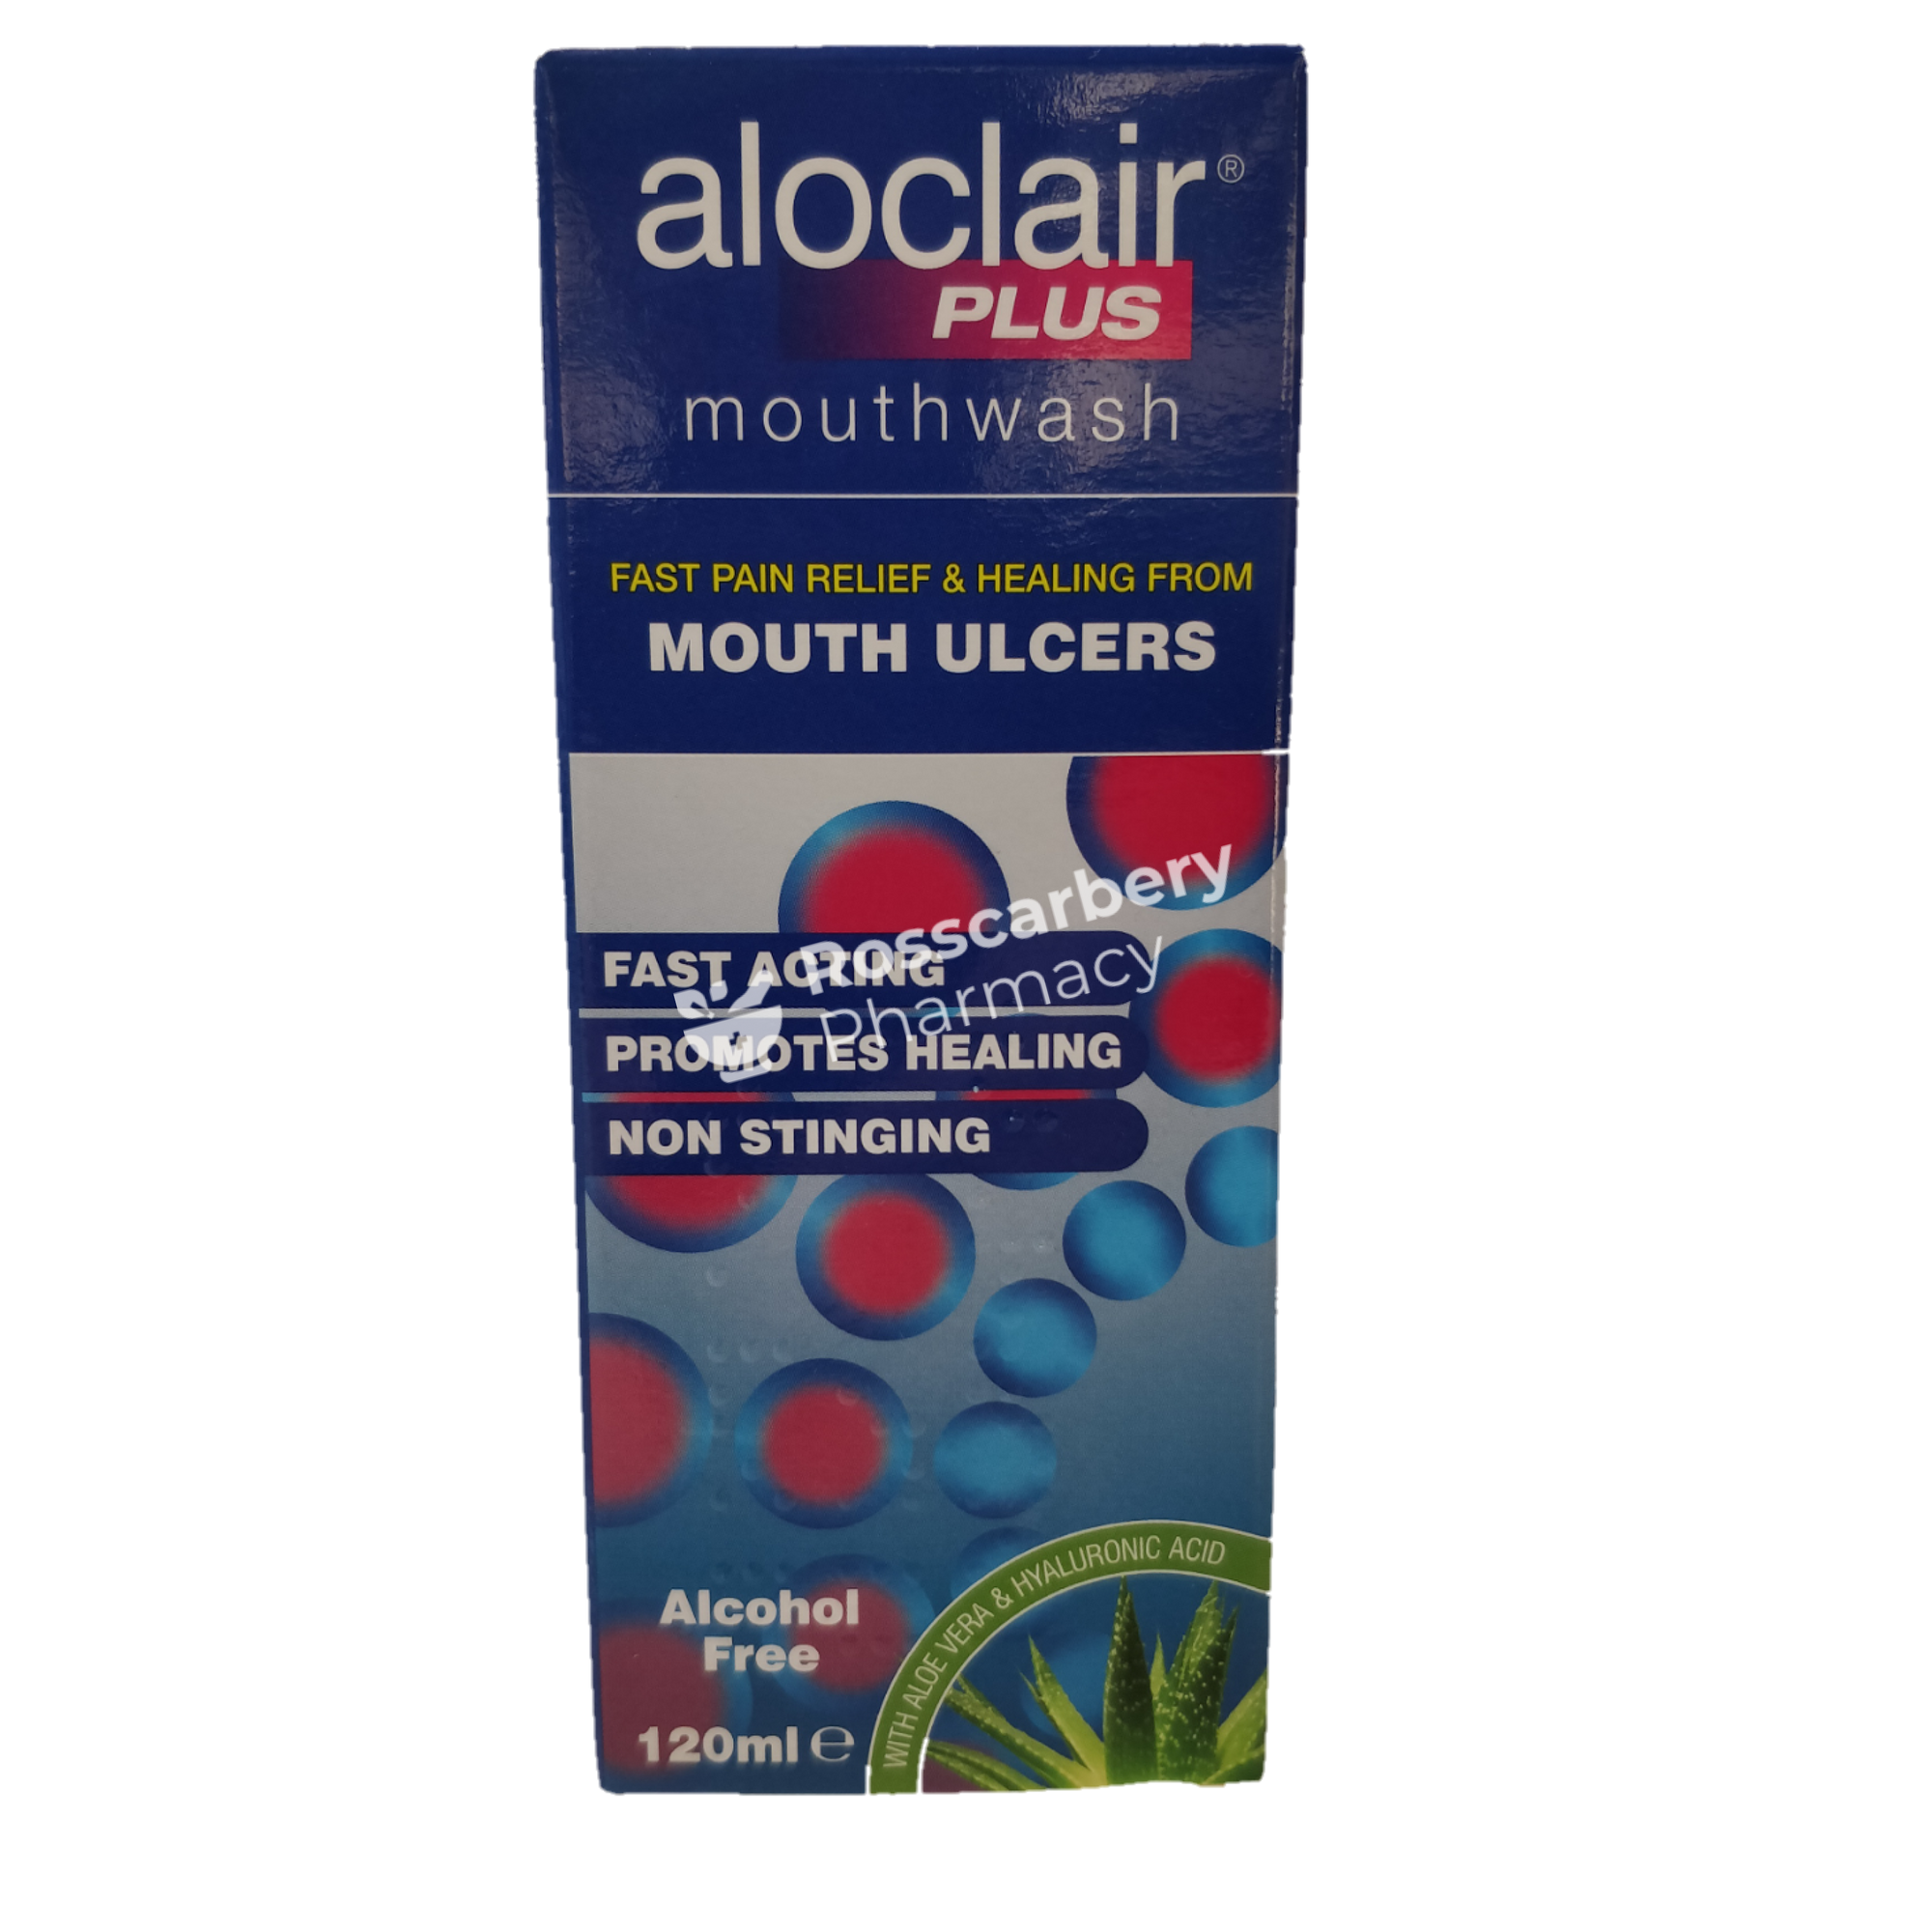 Aloclair Plus Mouthwash - Pain Relief & Healing From Mouth Ulcers Cold Sores